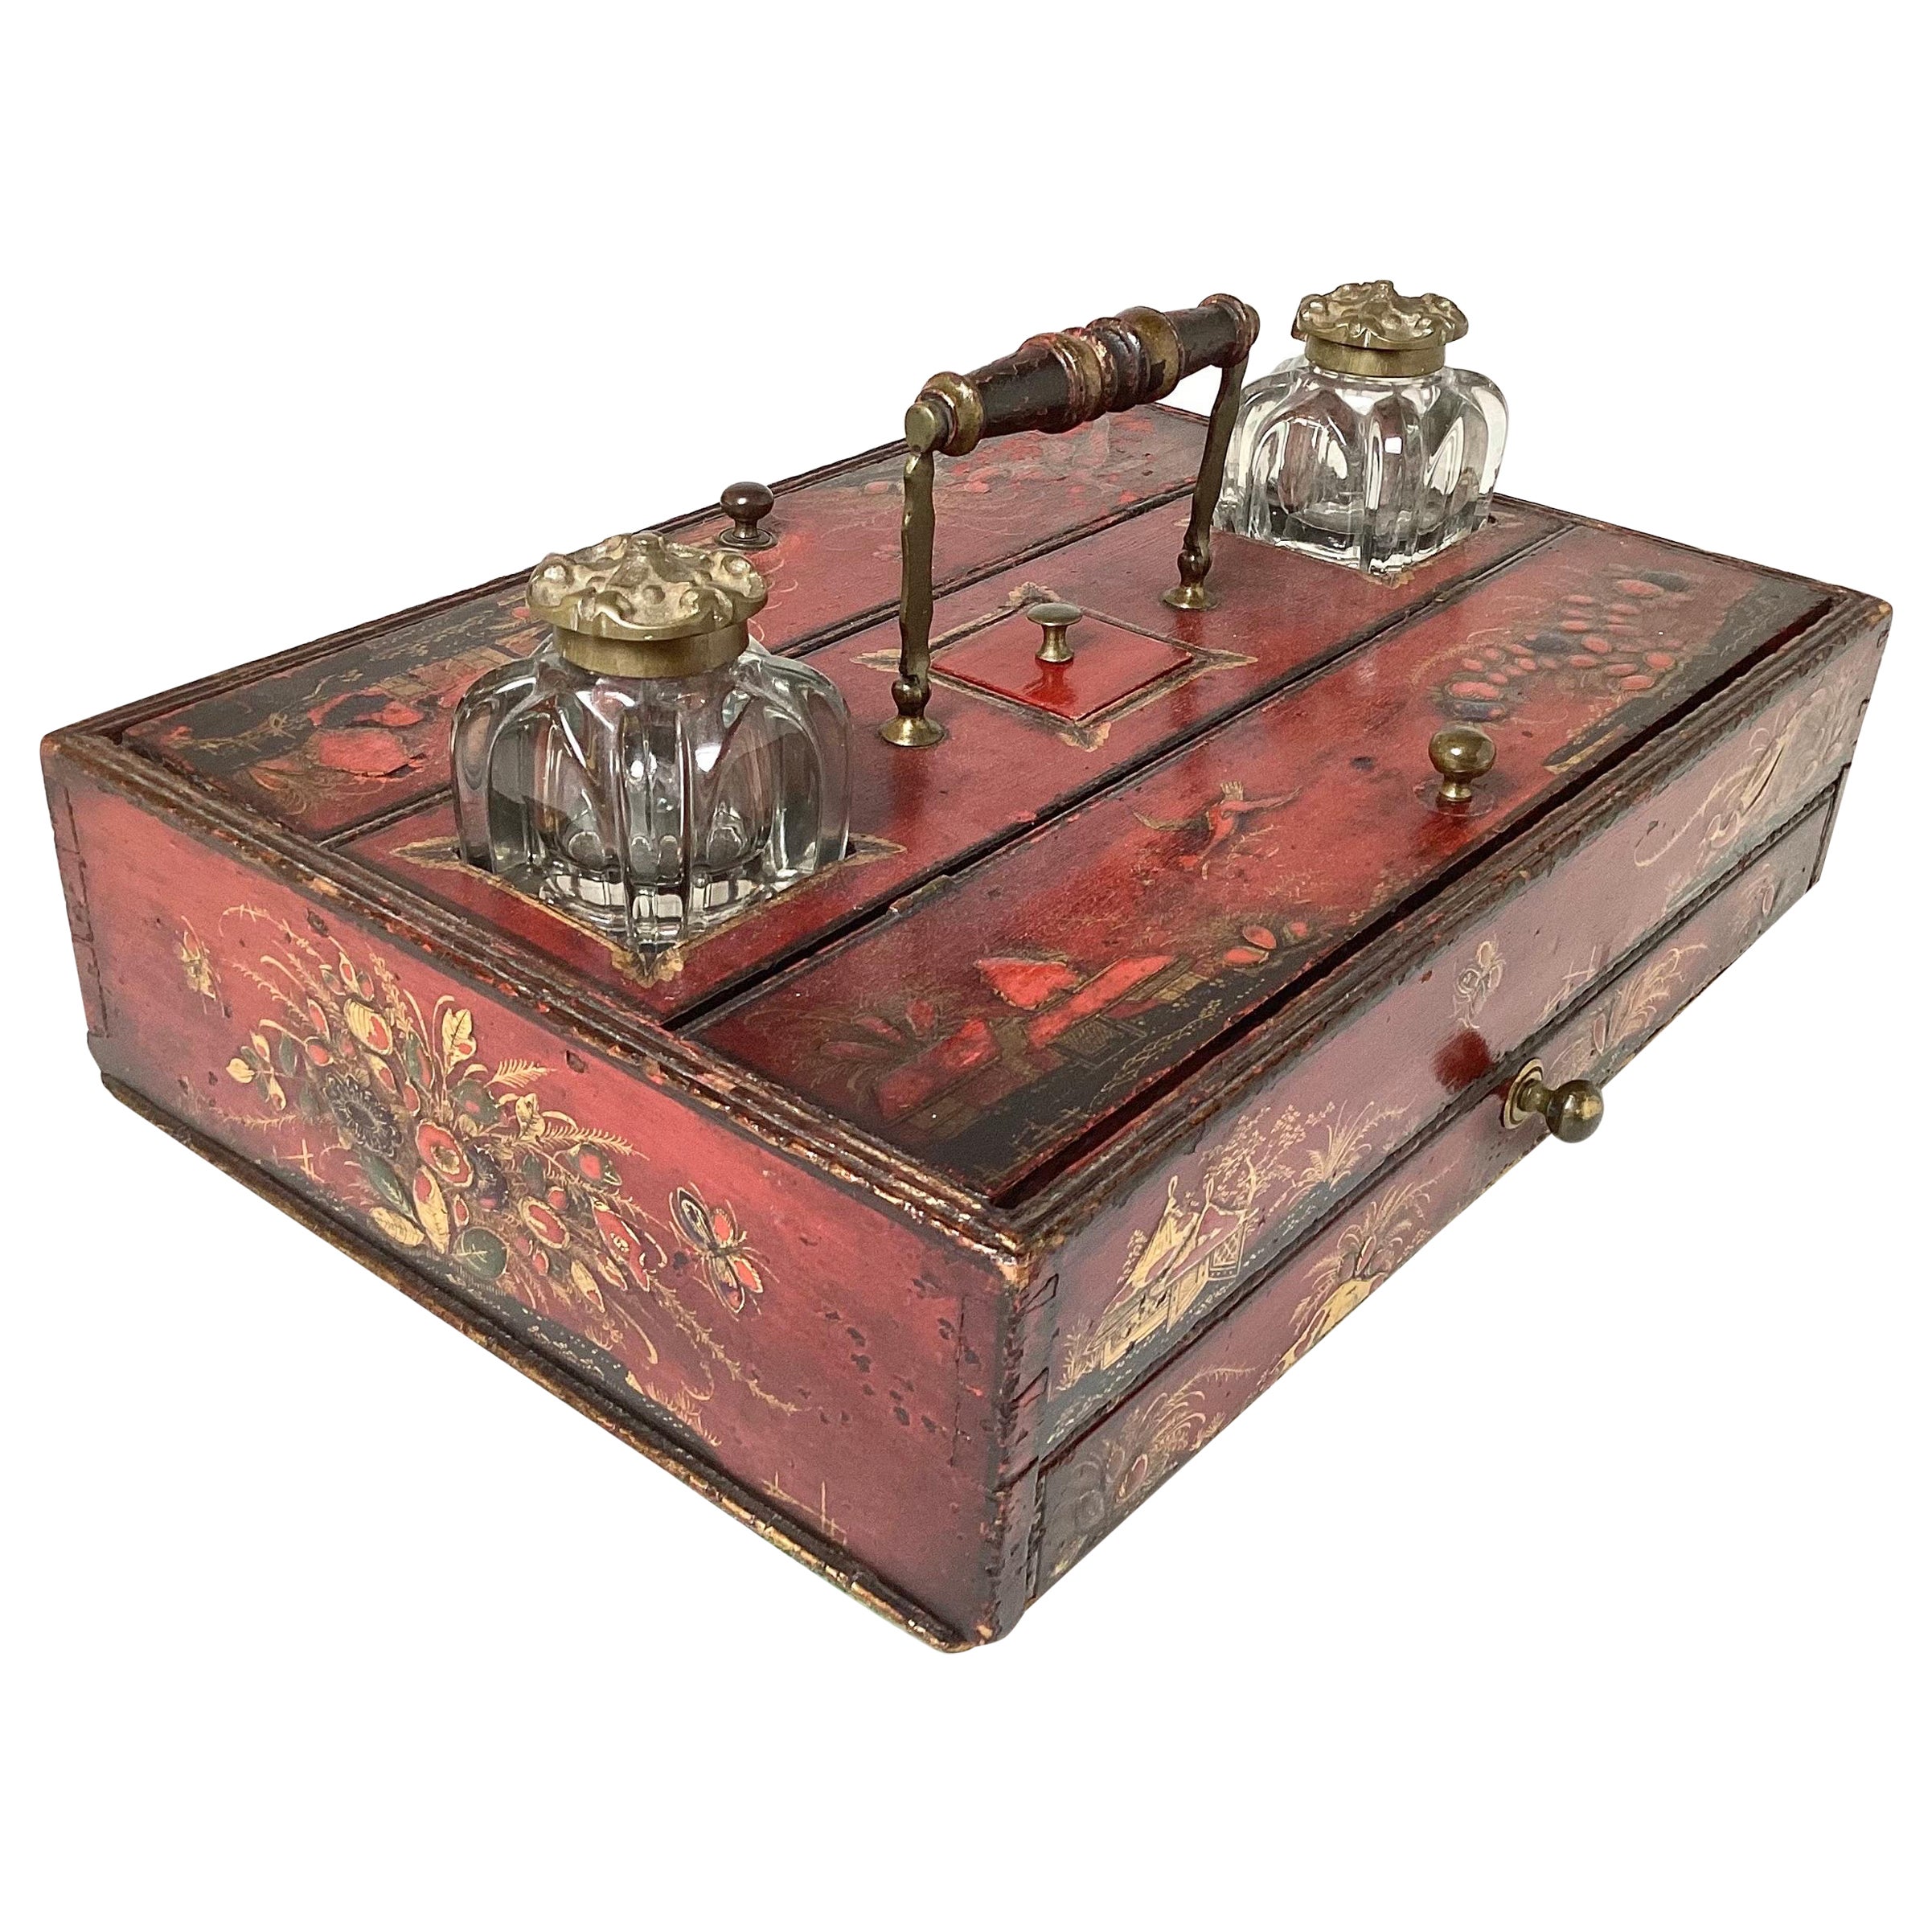 Which object in a Japanese writing box was considered the most precious and permanent?